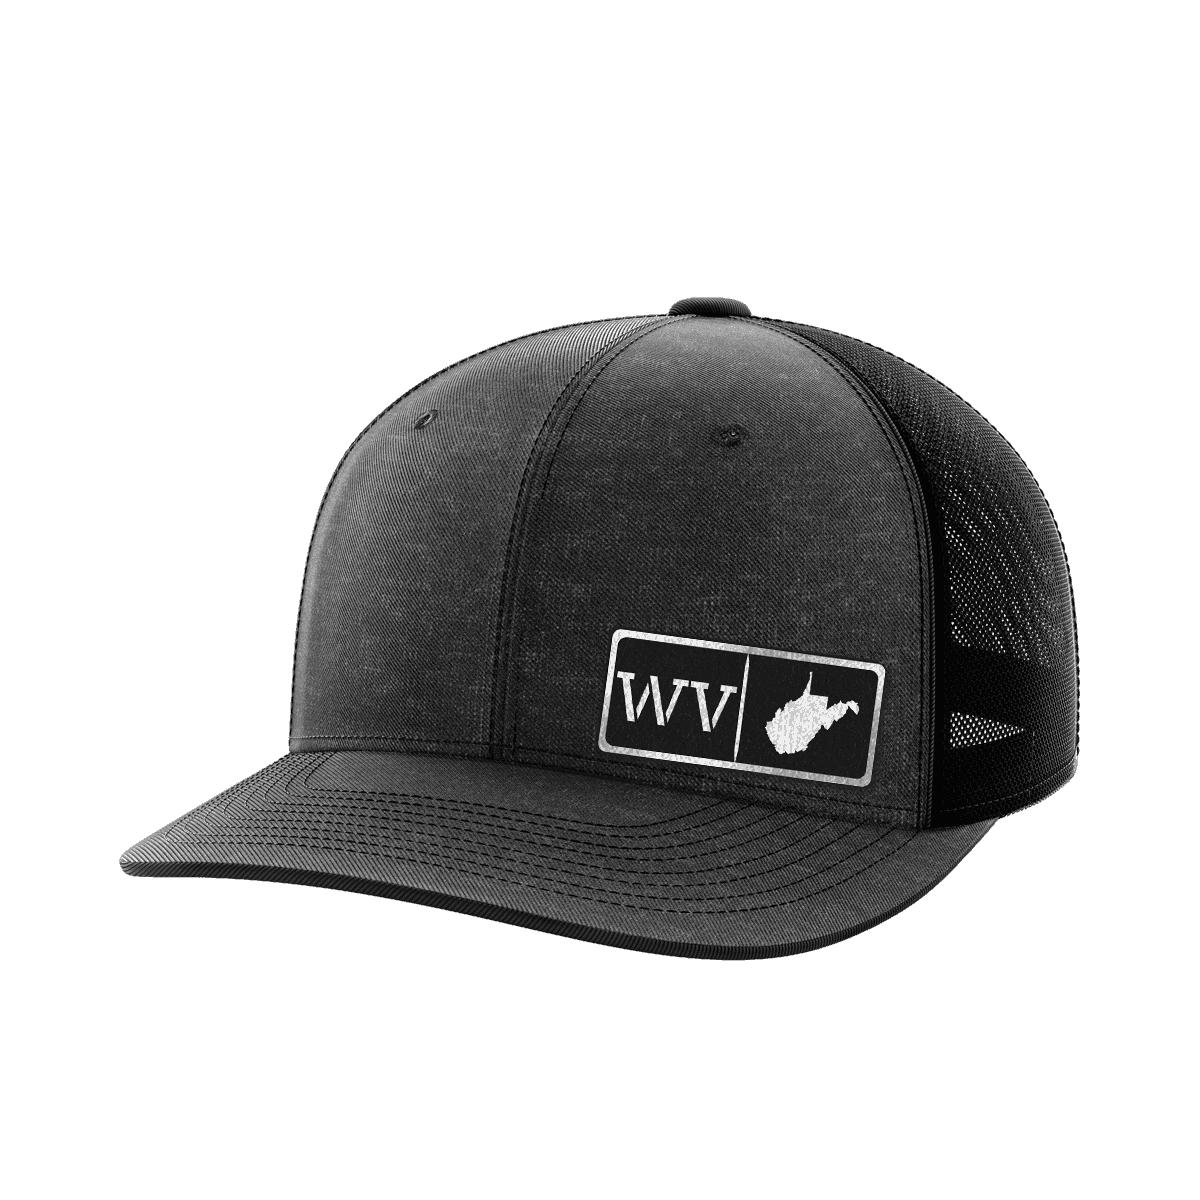 Thumbnail for West Virginia Homegrown Hats - Greater Half